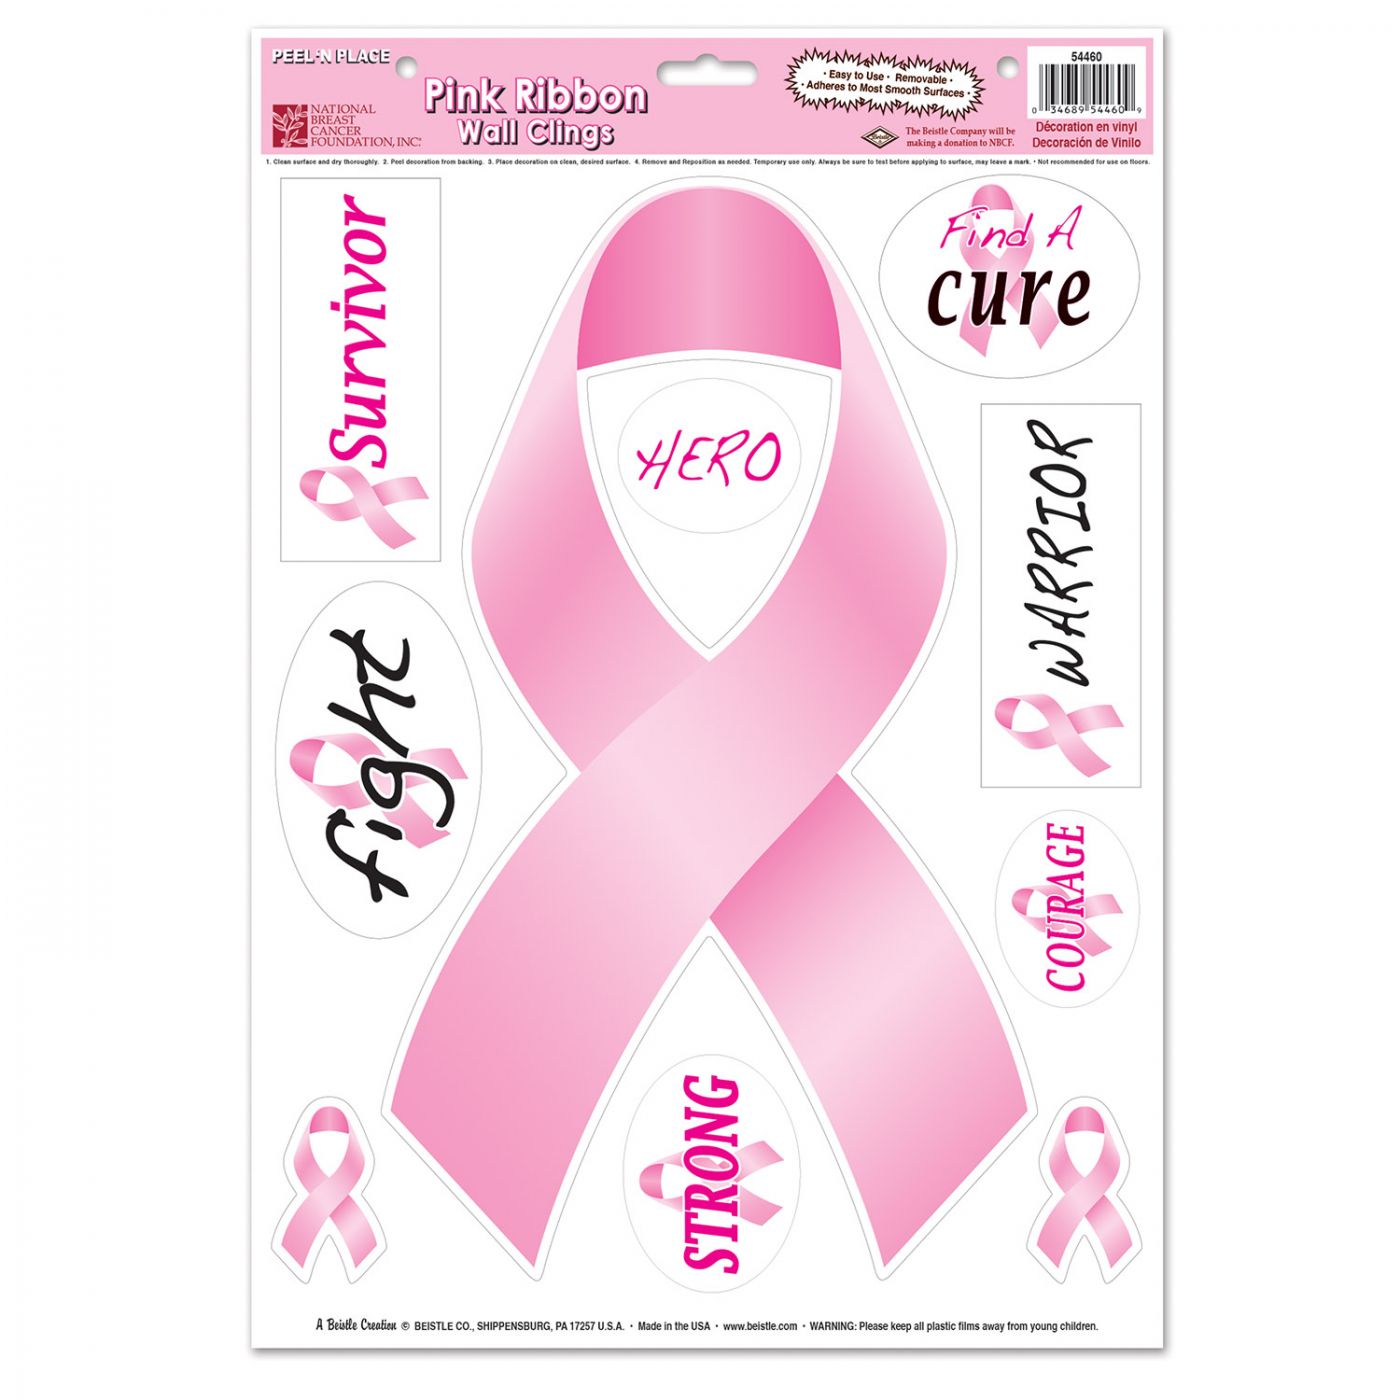 Pink Ribbon/Find A Cure Peel 'N Place image